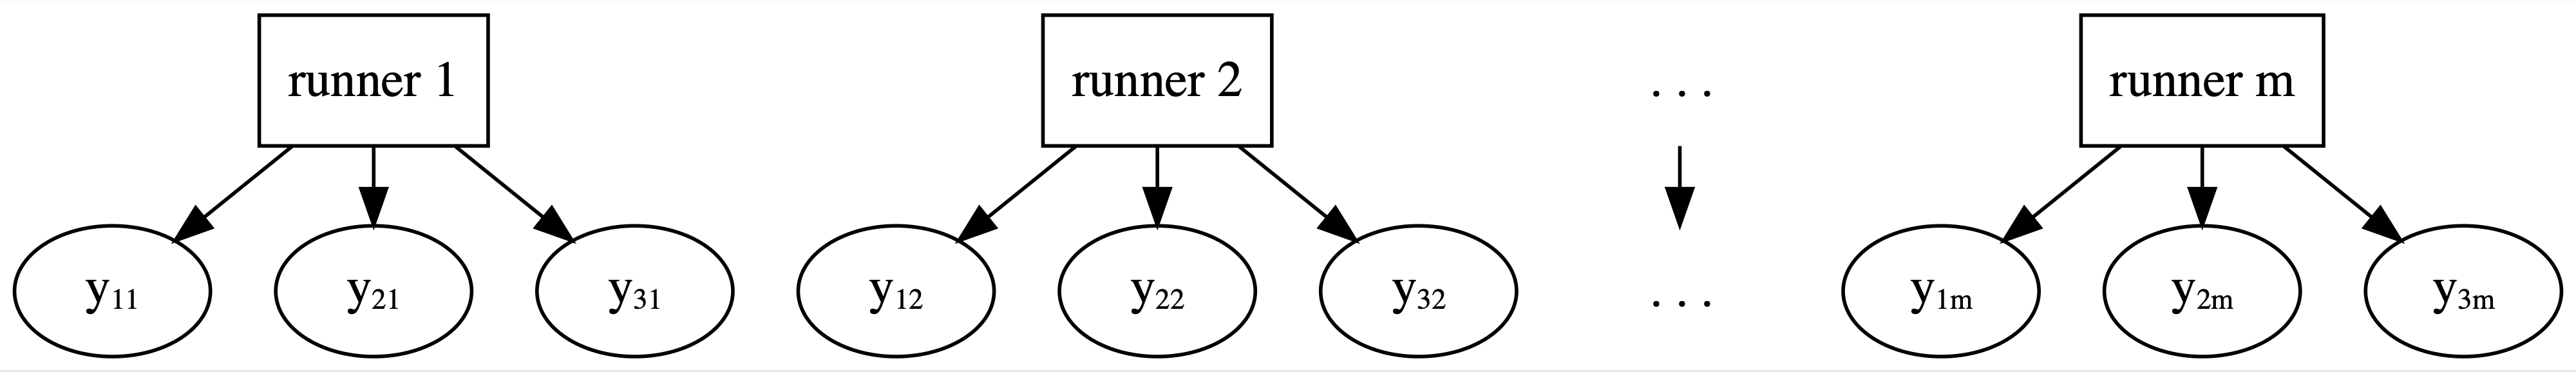 Three separate, unconnected flow charts. At the top of each is a box. These are labeled runner 1, runner 2, and runner m. Out of each box are 3 different arrows leading to bubbles representing 3 unique data points on each runner.